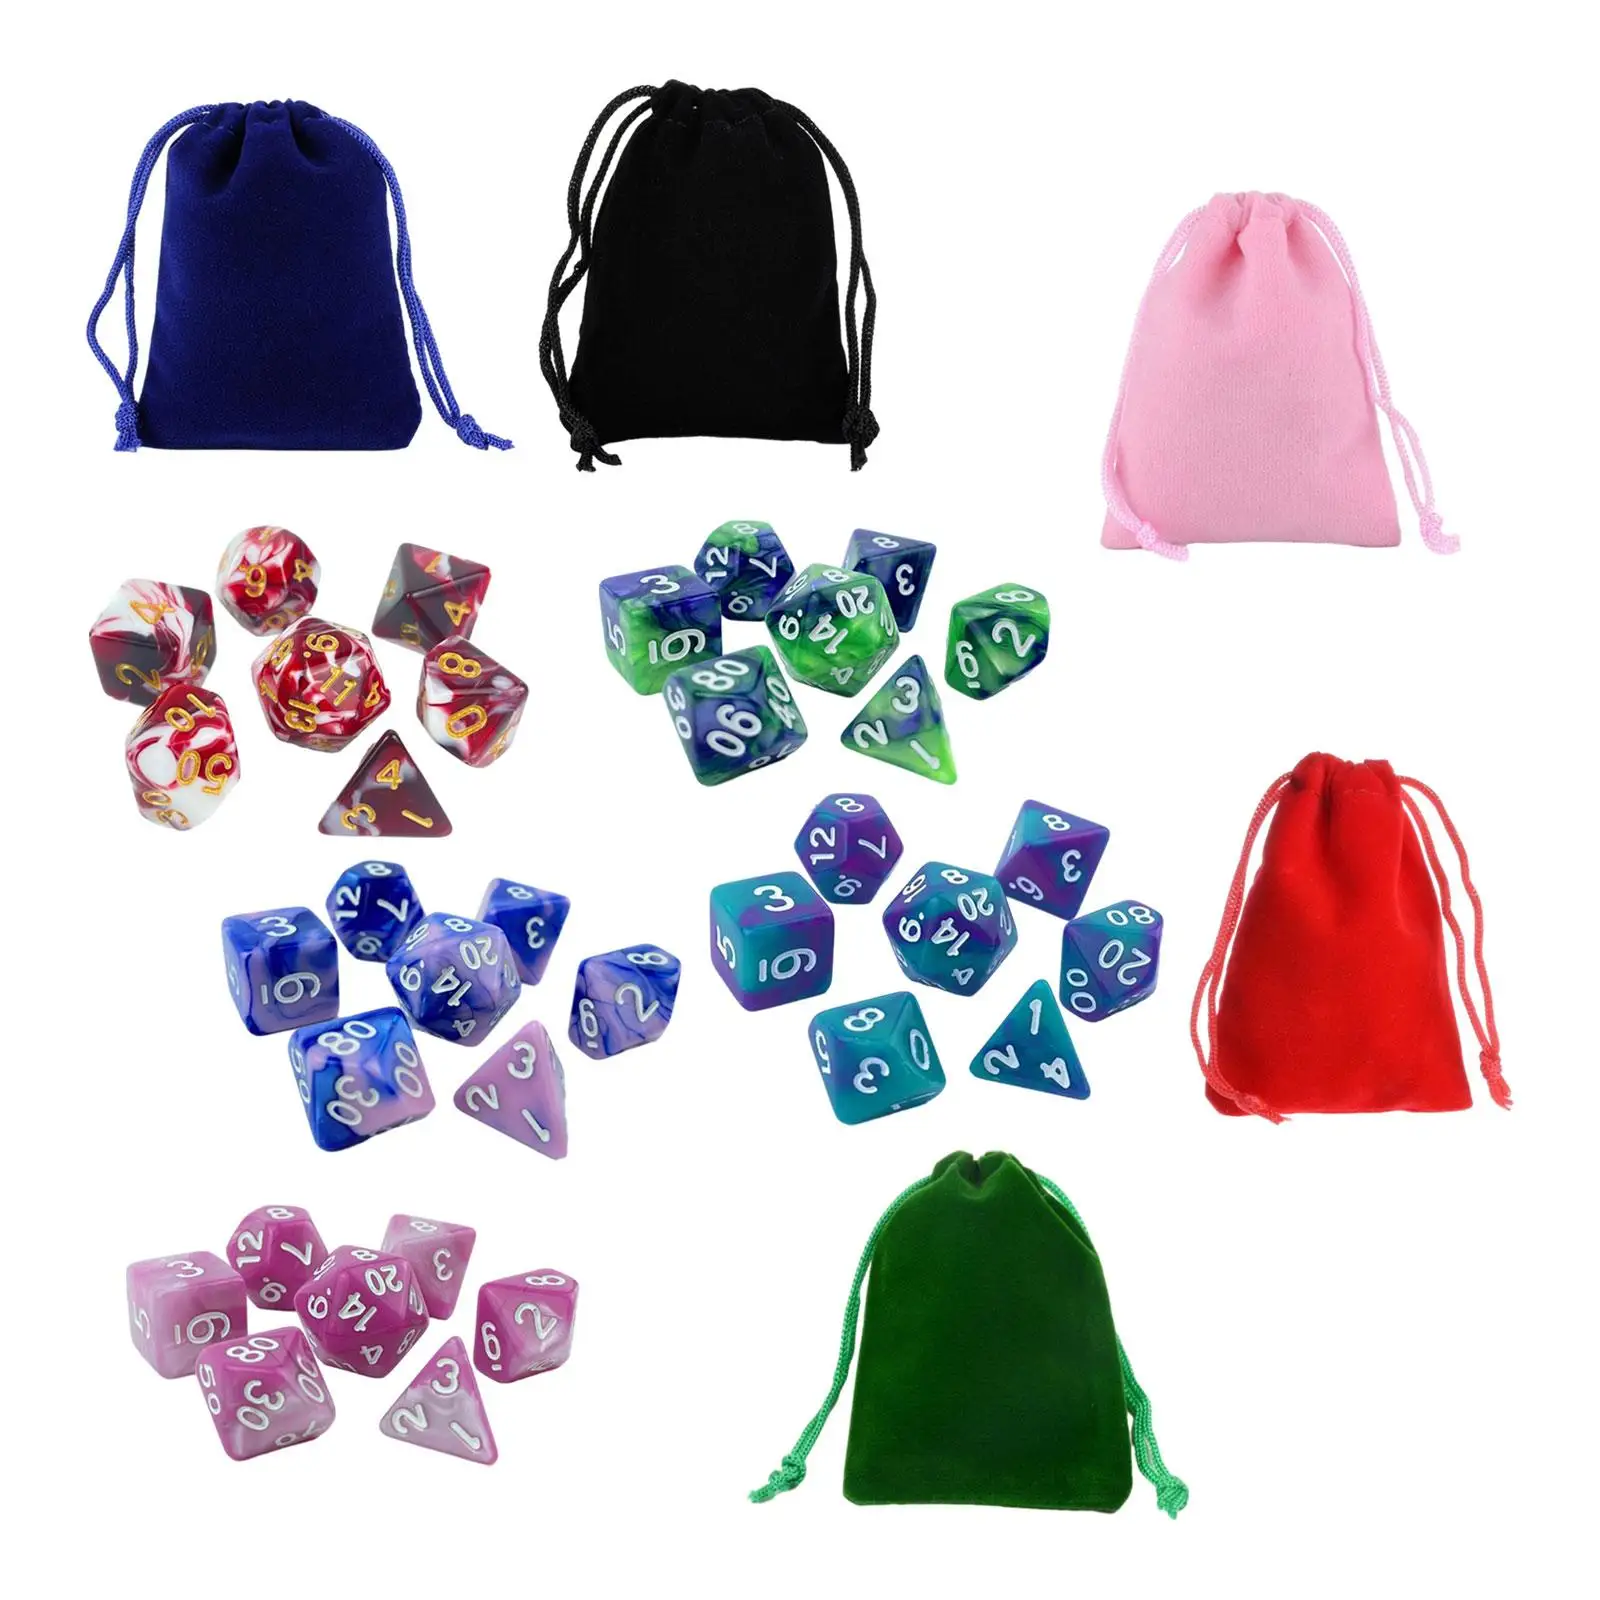 35 Pieces Polyhedral Dices Set with Drawstring Bags Family Games Accessaries Number Game Dice Games Set for Table Board Party